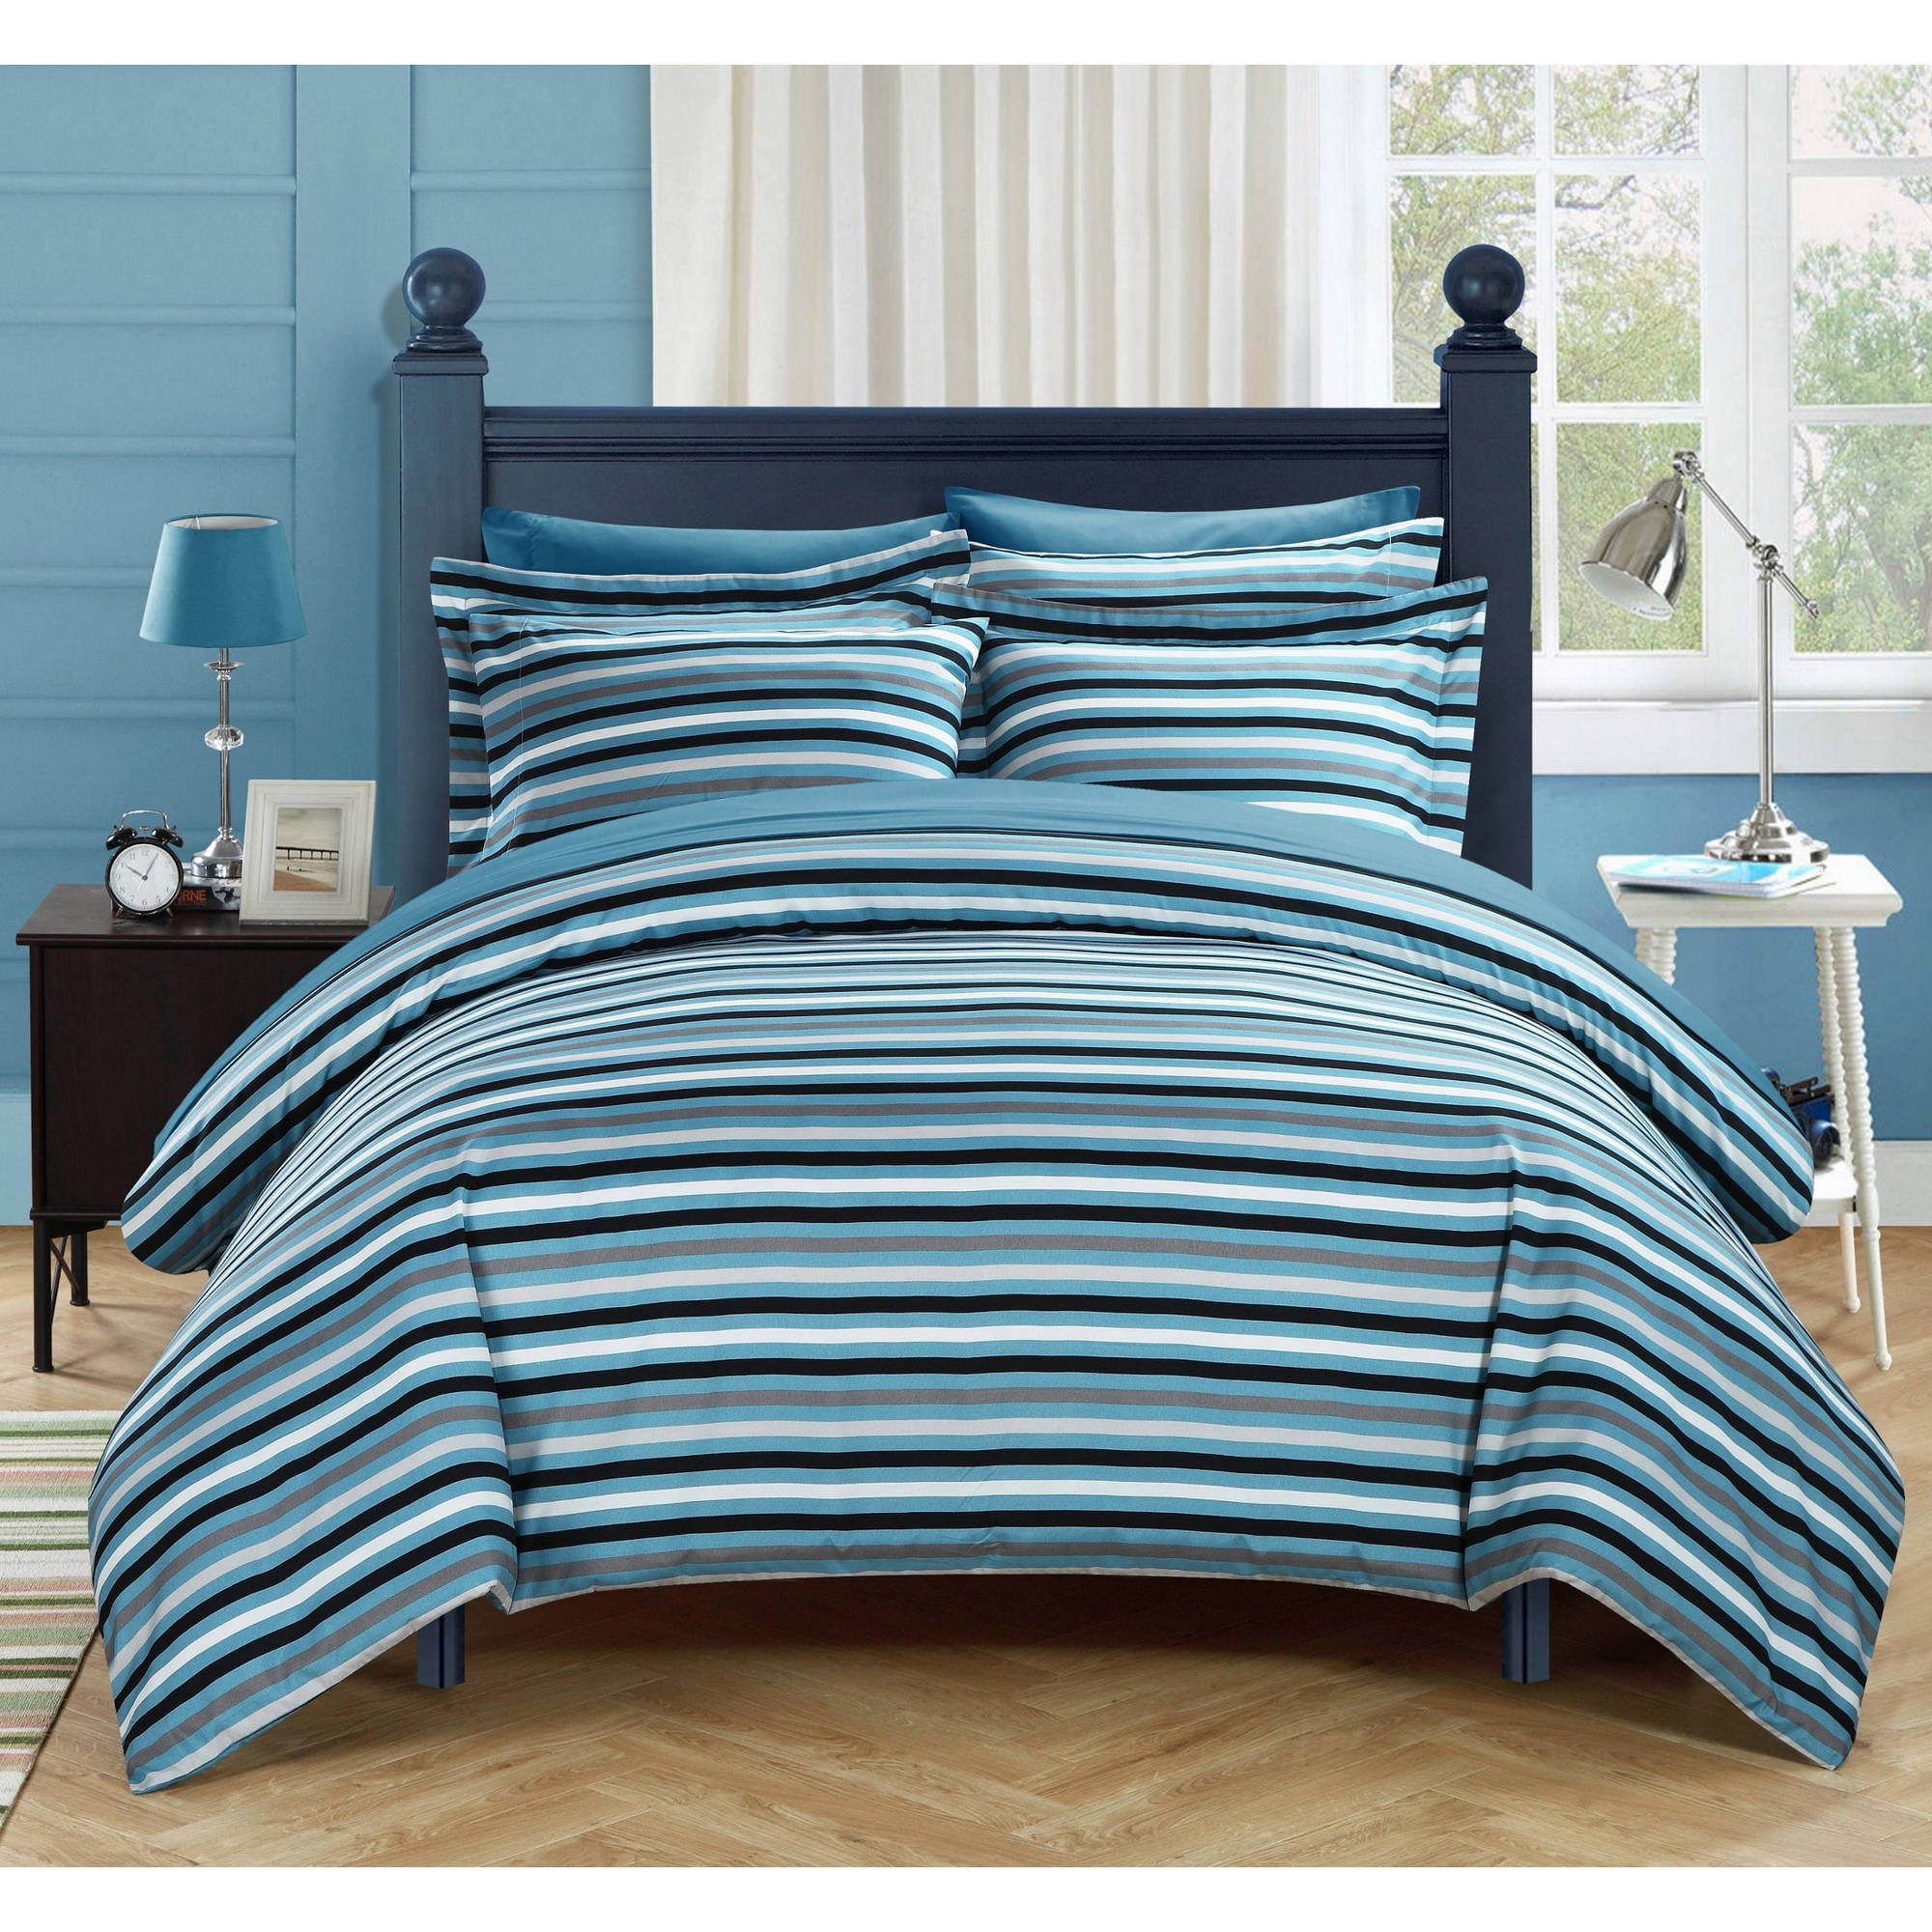 Double, Blue Lifestyle Production Chester Stripe Duvet Quilt Covers With Pillowcase Reversible Bedding Sets 